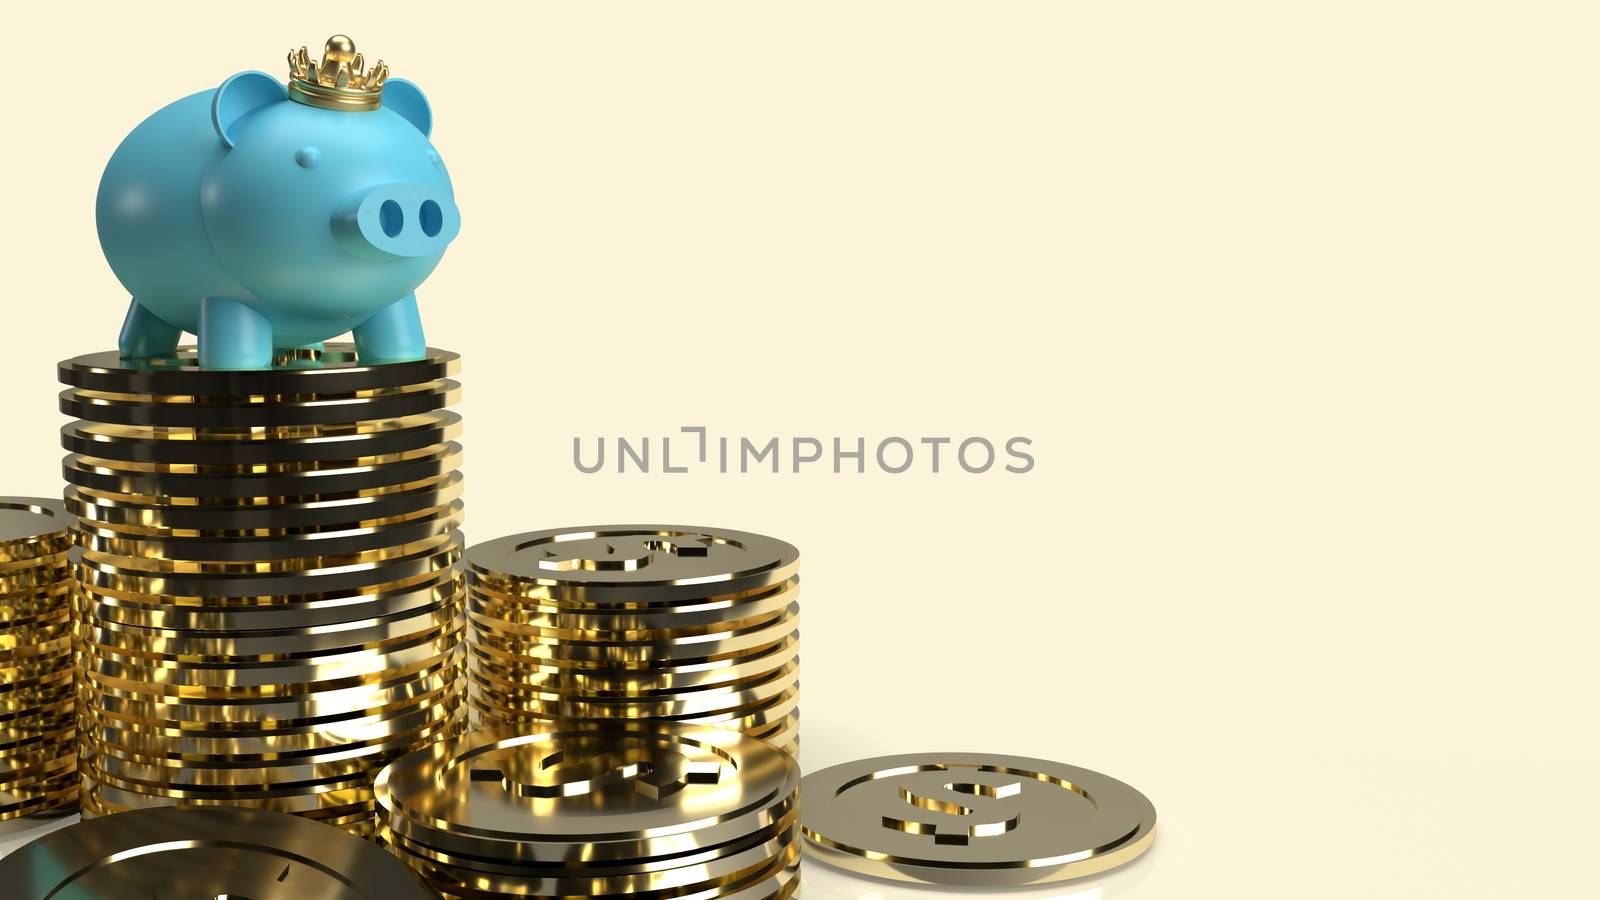 The blue pig bank and crown on gold coins for business content 3 by Niphon_13